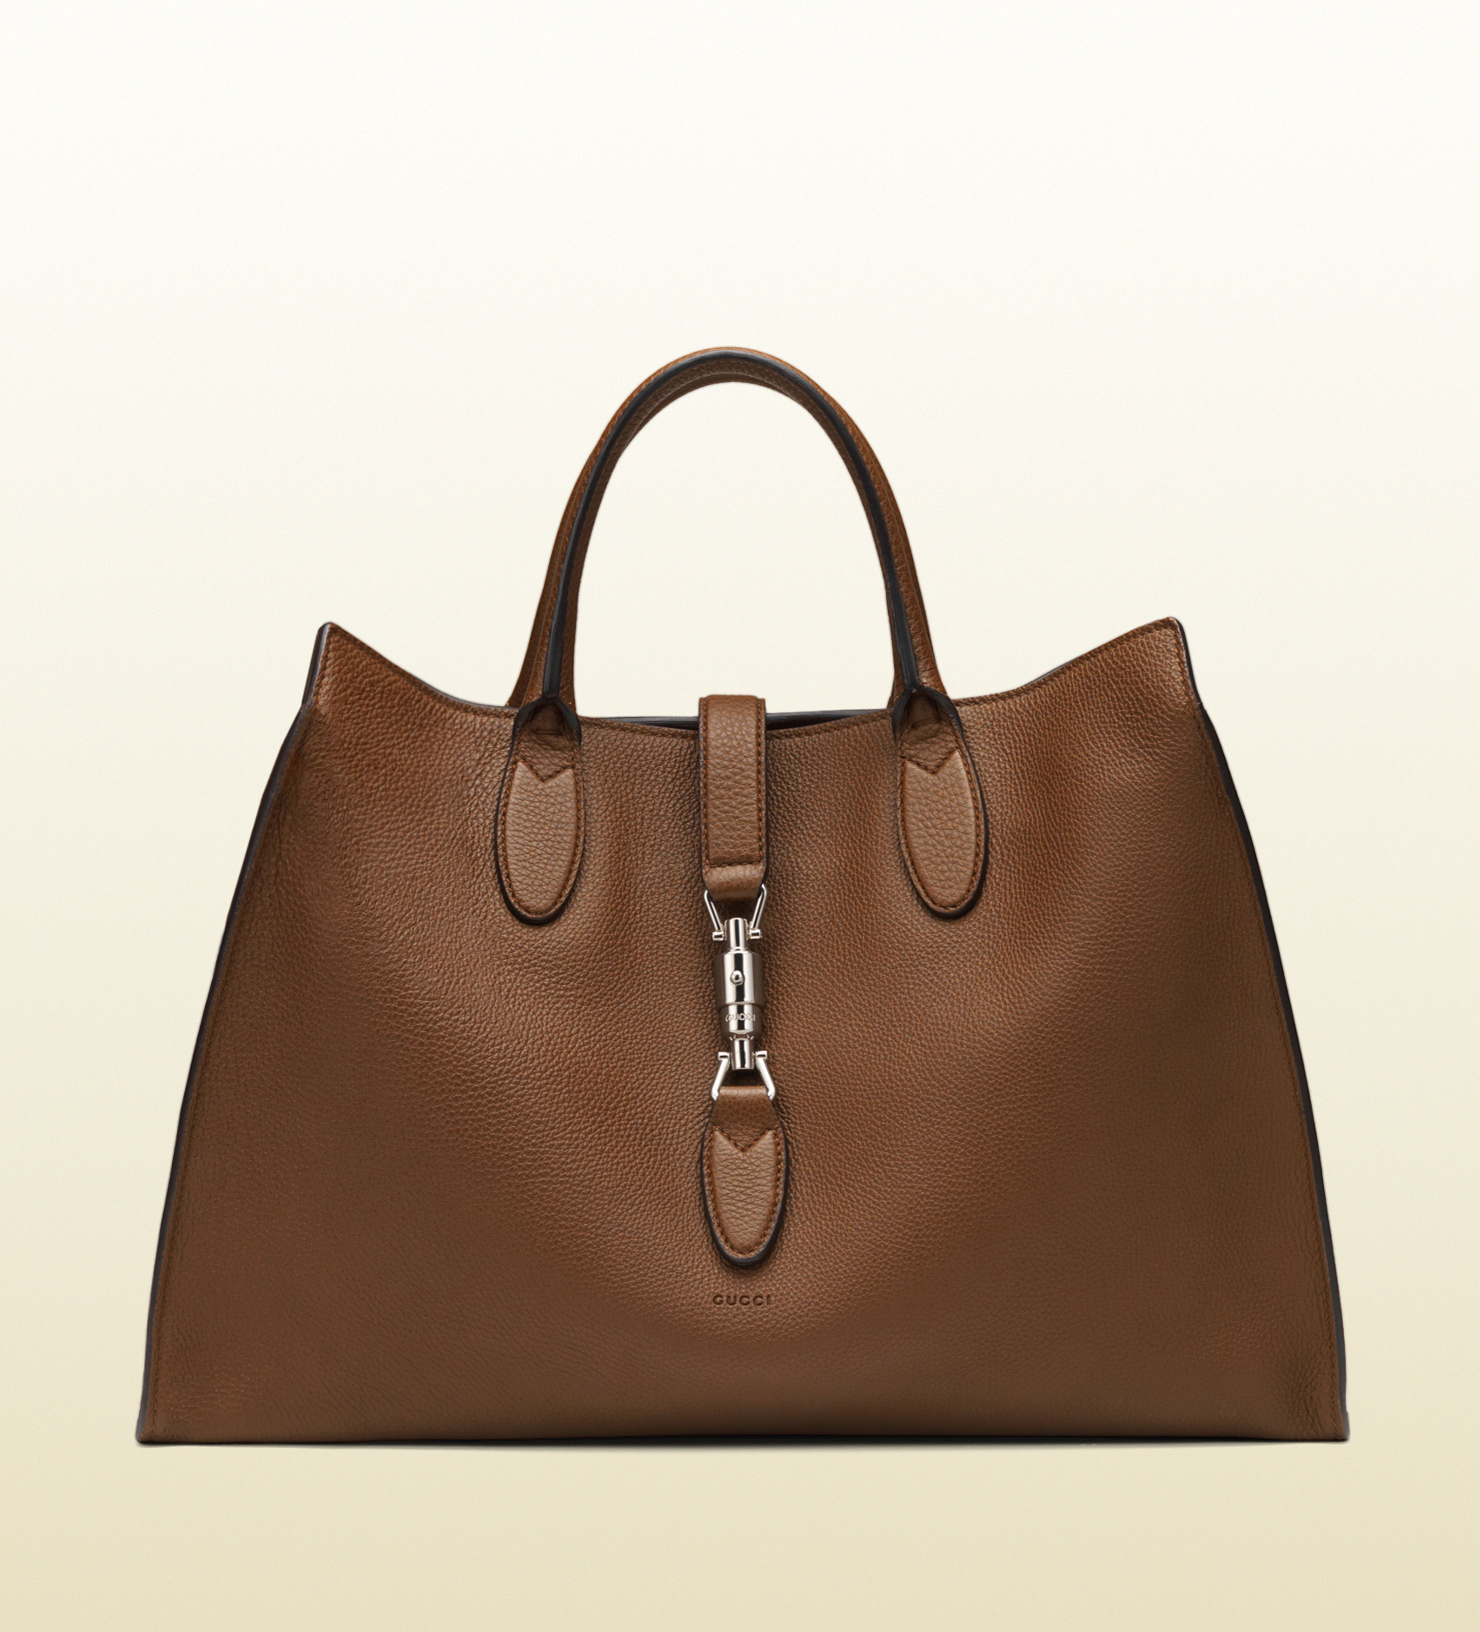 Gucci Jackie Soft Leather Top Handle Bag in Brown (nut) | Lyst